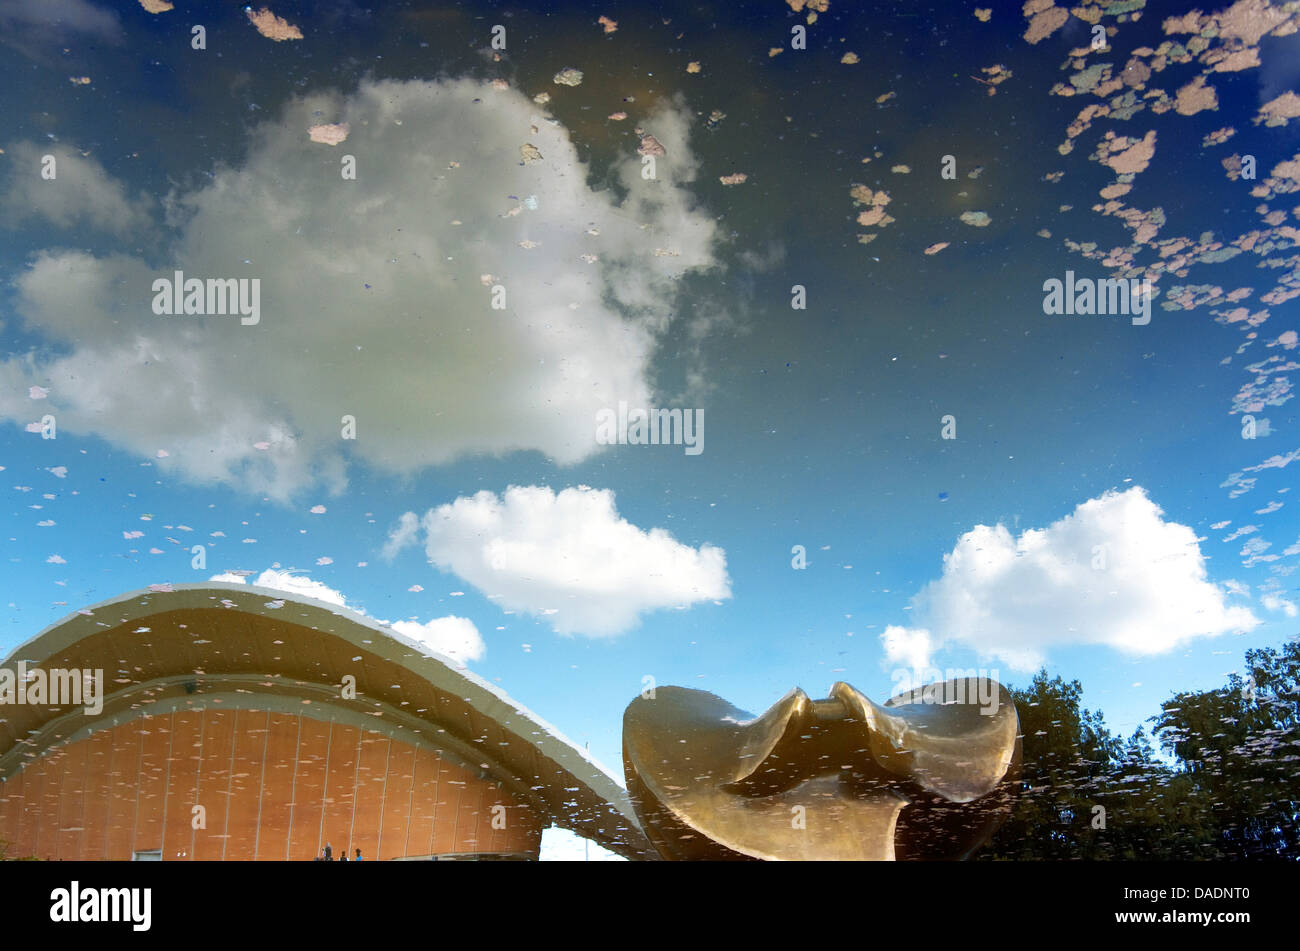 Germany, Berlin, Abstract mirroring of house world culture Stock Photo